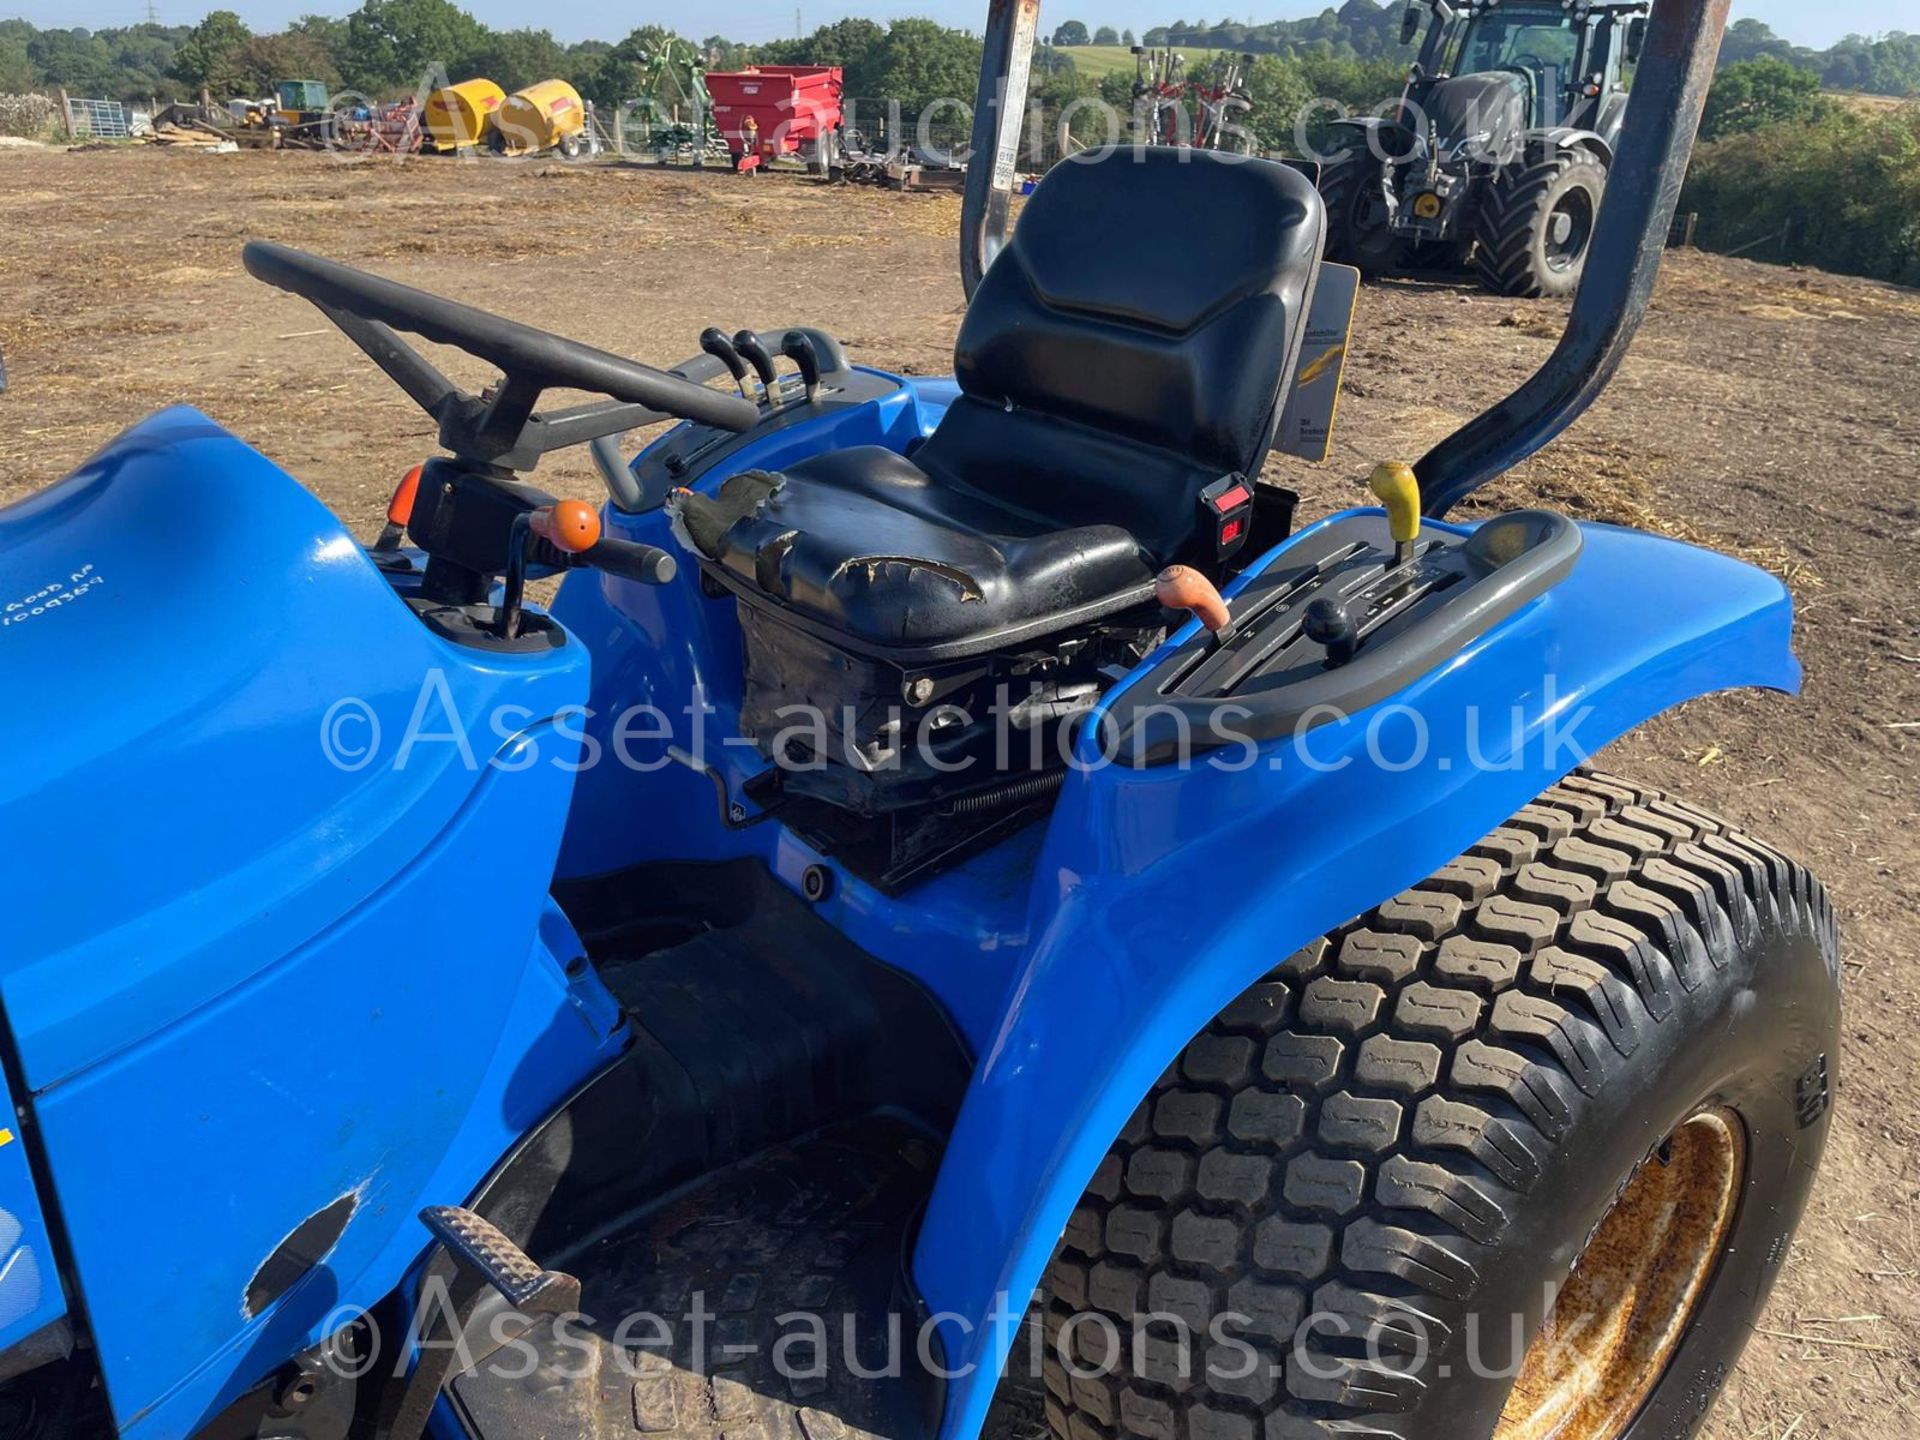 2005 NEW HOLLAND TC27DA 27hp 4WD COMPACT TRACTOR, RUNS DRIVES AND WORKS WELL, ROAD REGISTERED - Image 17 of 26